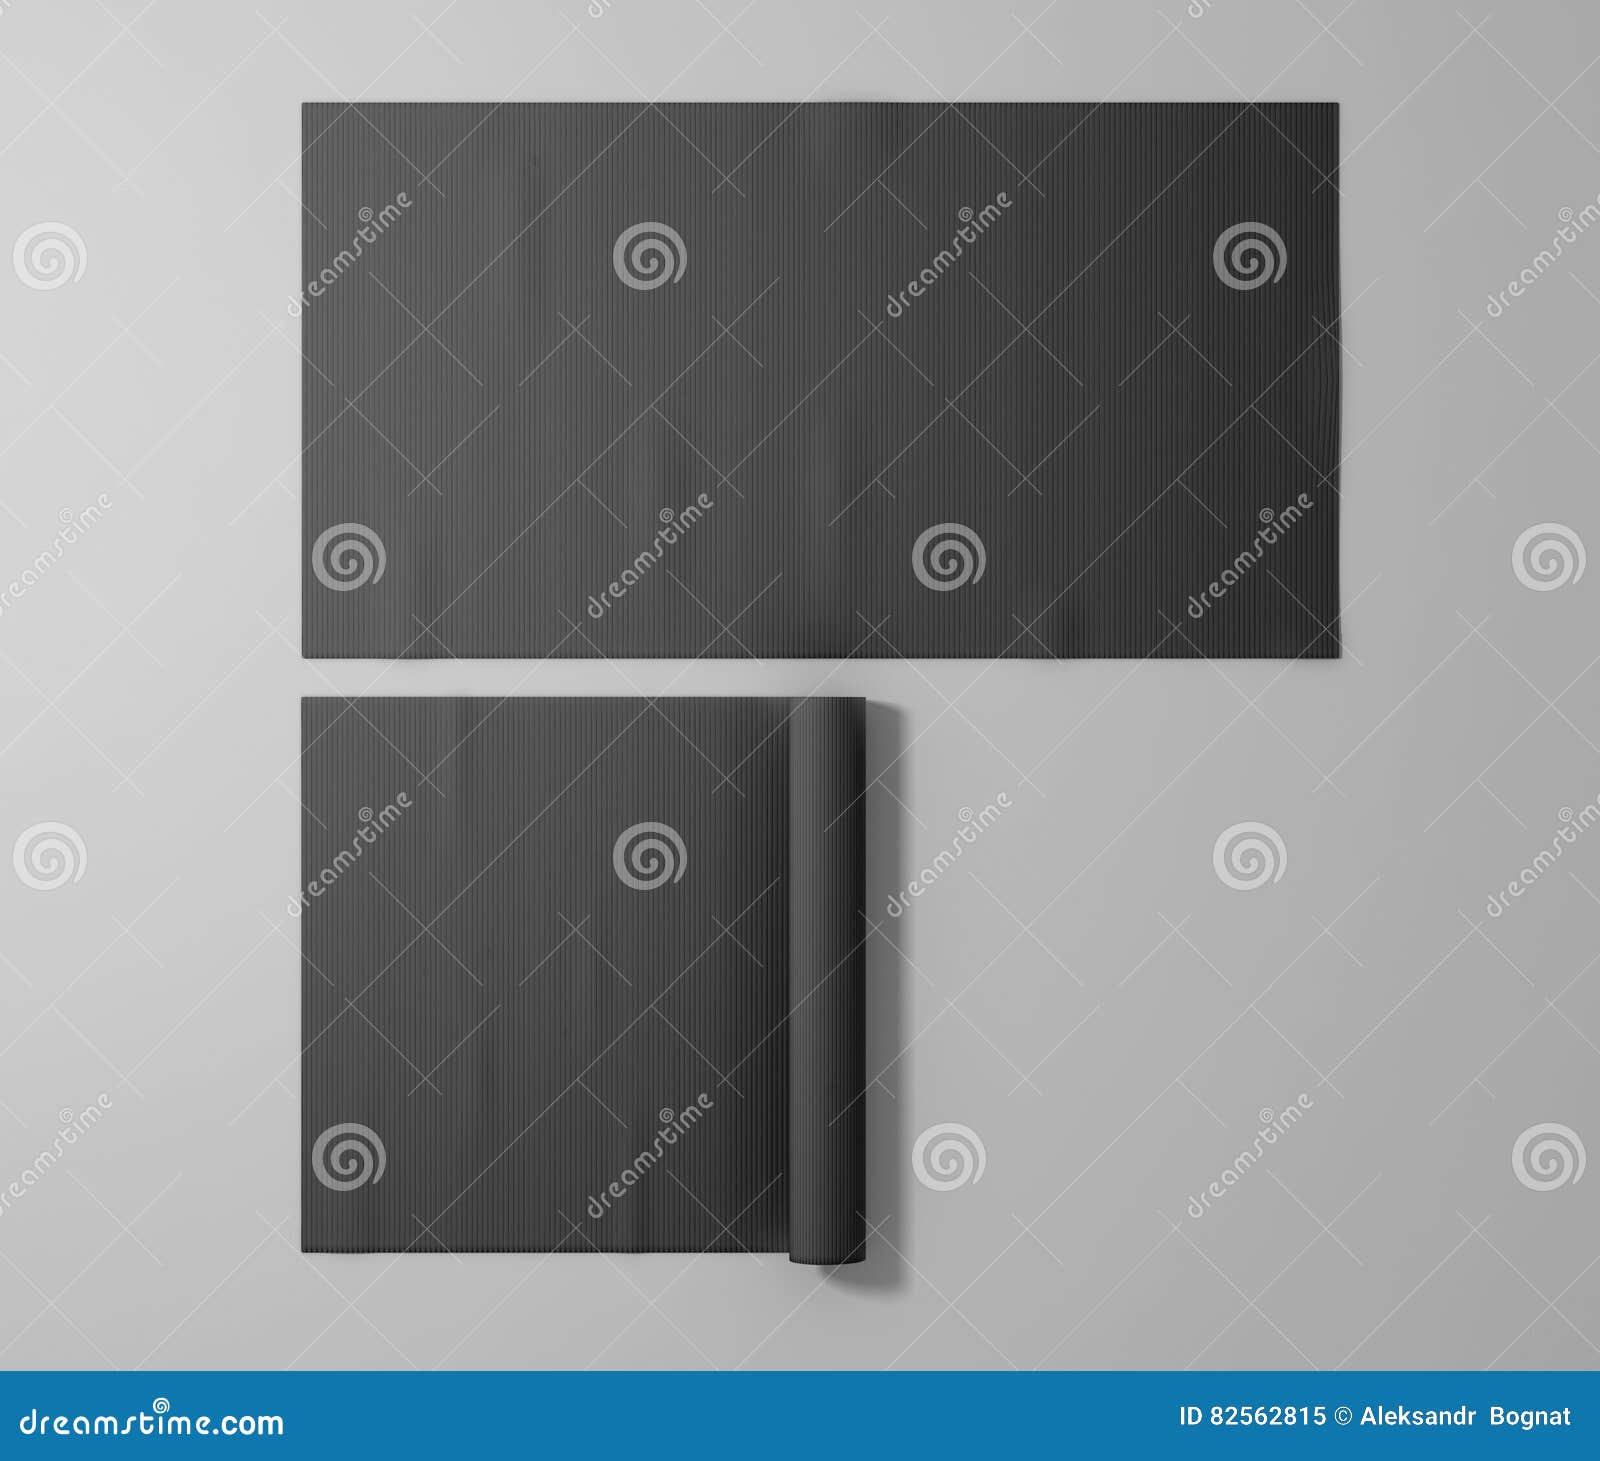 Download Blank Black Rubber Sport Mat Mockup, Isolated Stock Image - Image of dark, empty: 82562815